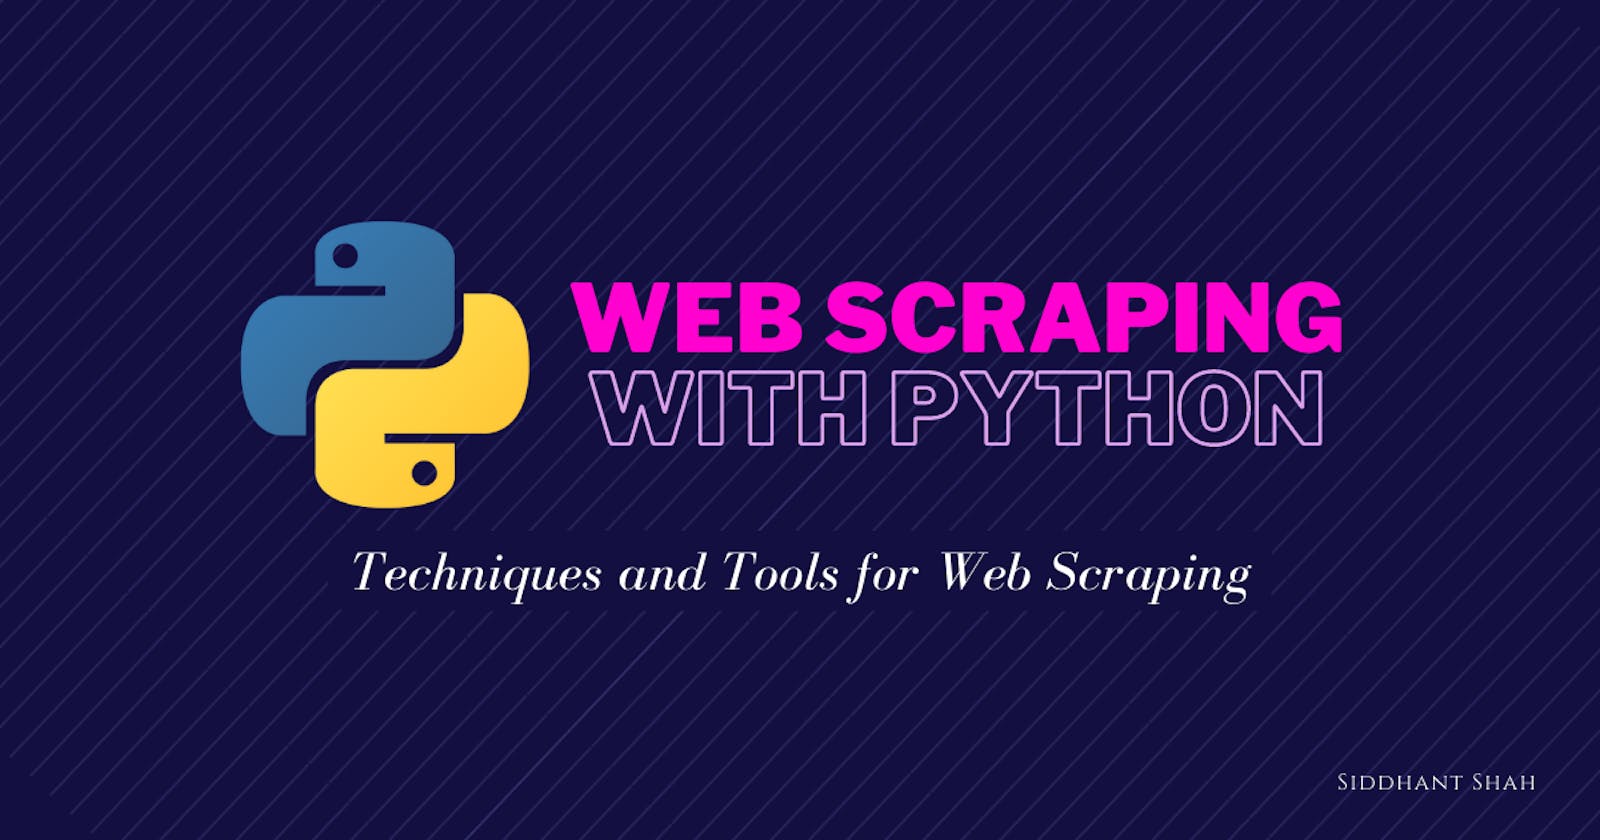 Techniques and Tools for Web Scraping